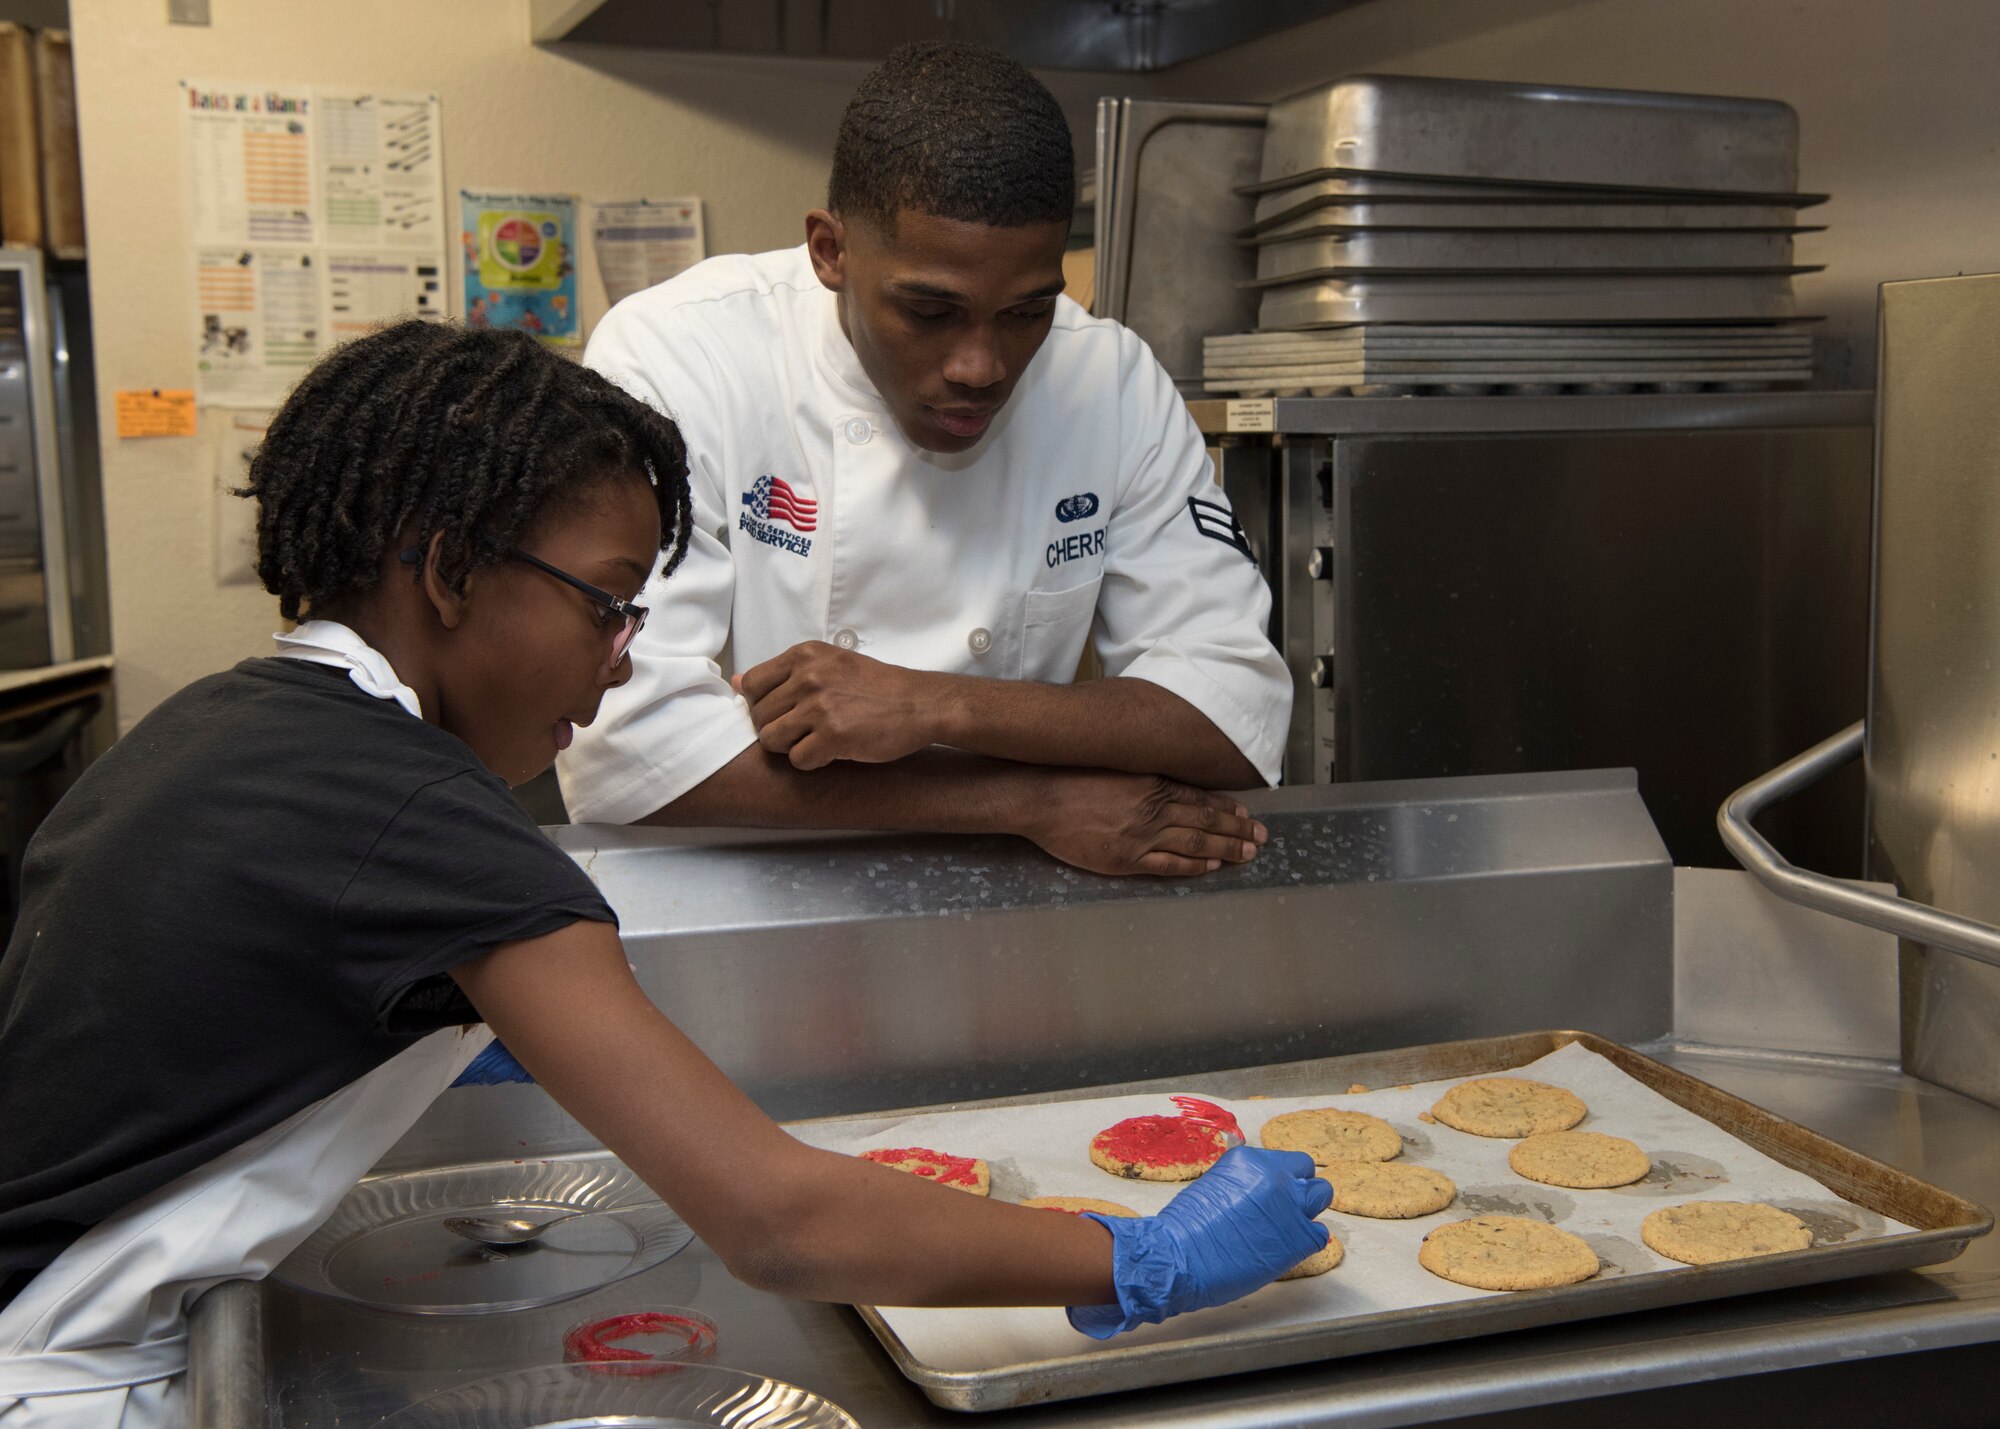 (From left to right) Ysabelle Smith, This is Sparta team leader (left), receives advice on making frosting hearts for cookies from Airman 1st Class Malik Cherry, 49th FSS food service specialist (right), Jan. 30, 2019, on Holloman Air Force Base, N.M. Seventeen members of the Youth and Teen Center signed up for a cookie baking competition and the competition lasted two and a half hours. (U.S. Air Force photo by Airman Autumn Vogt)